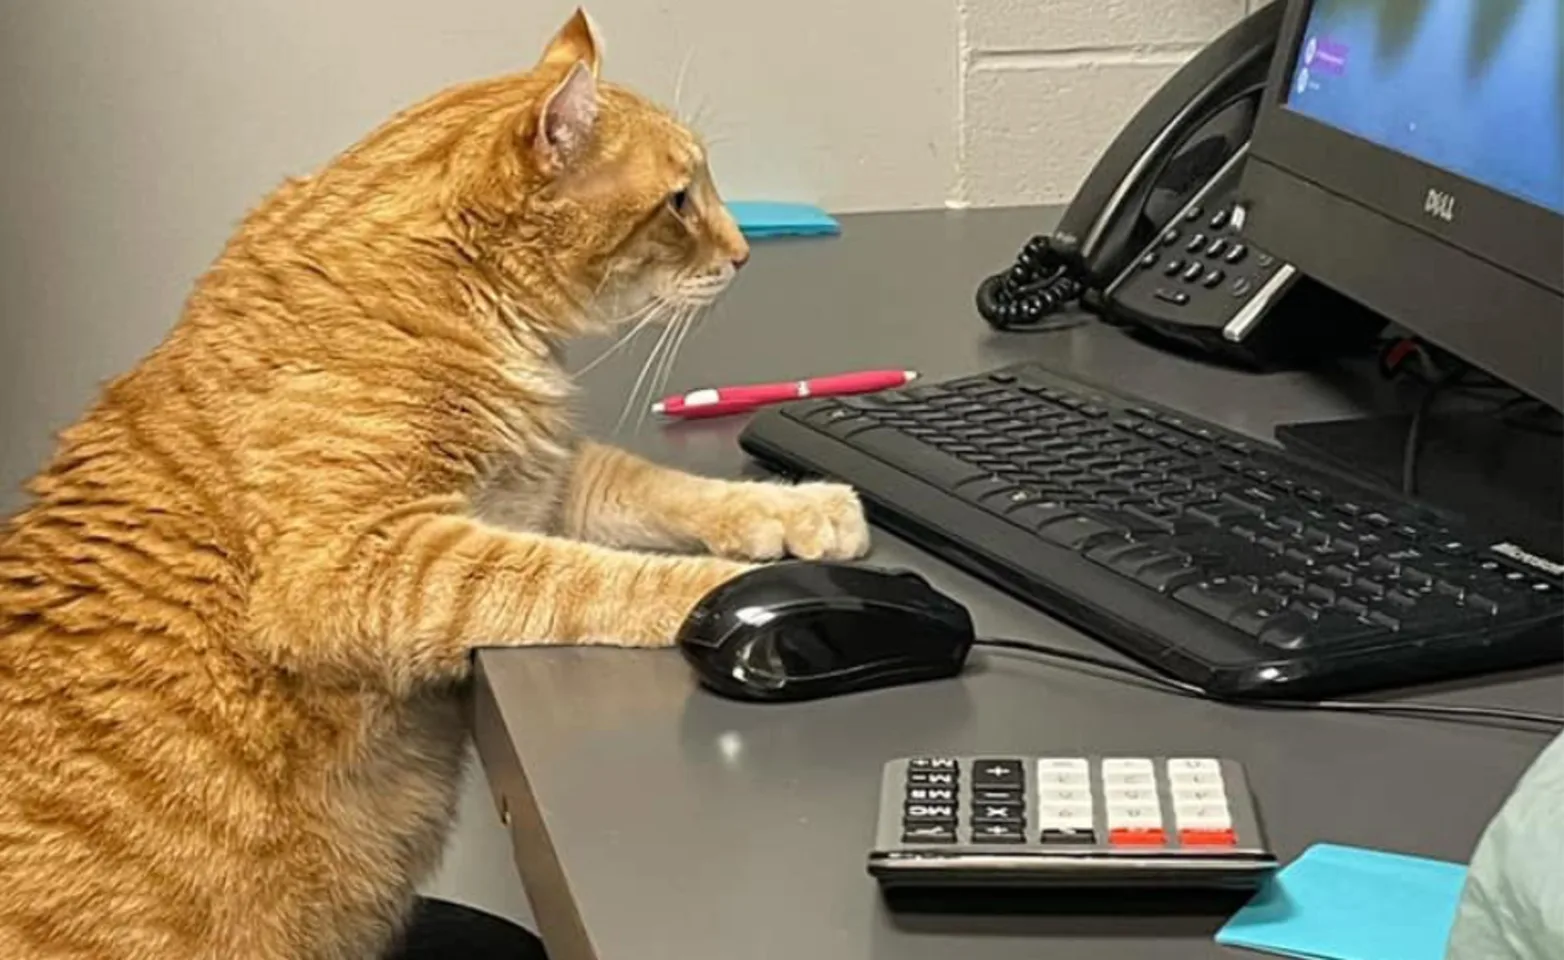 Orange cat sitting in front of a computer with a calculator next to it